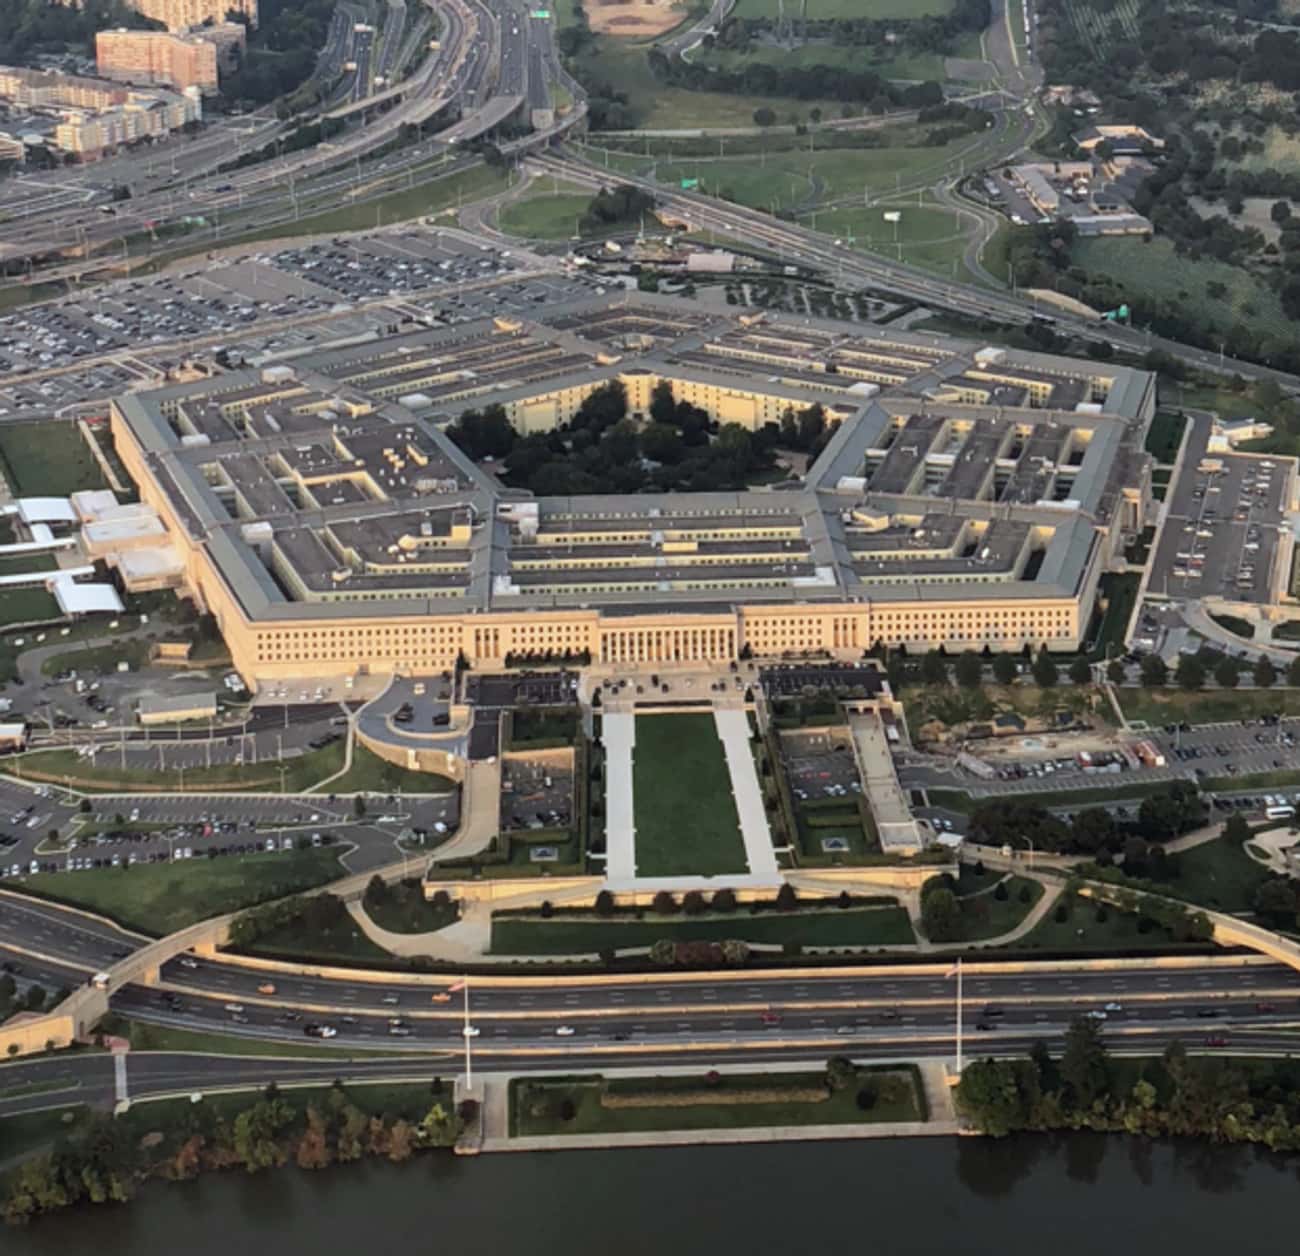 Why Is The Pentagon A Pentagon?